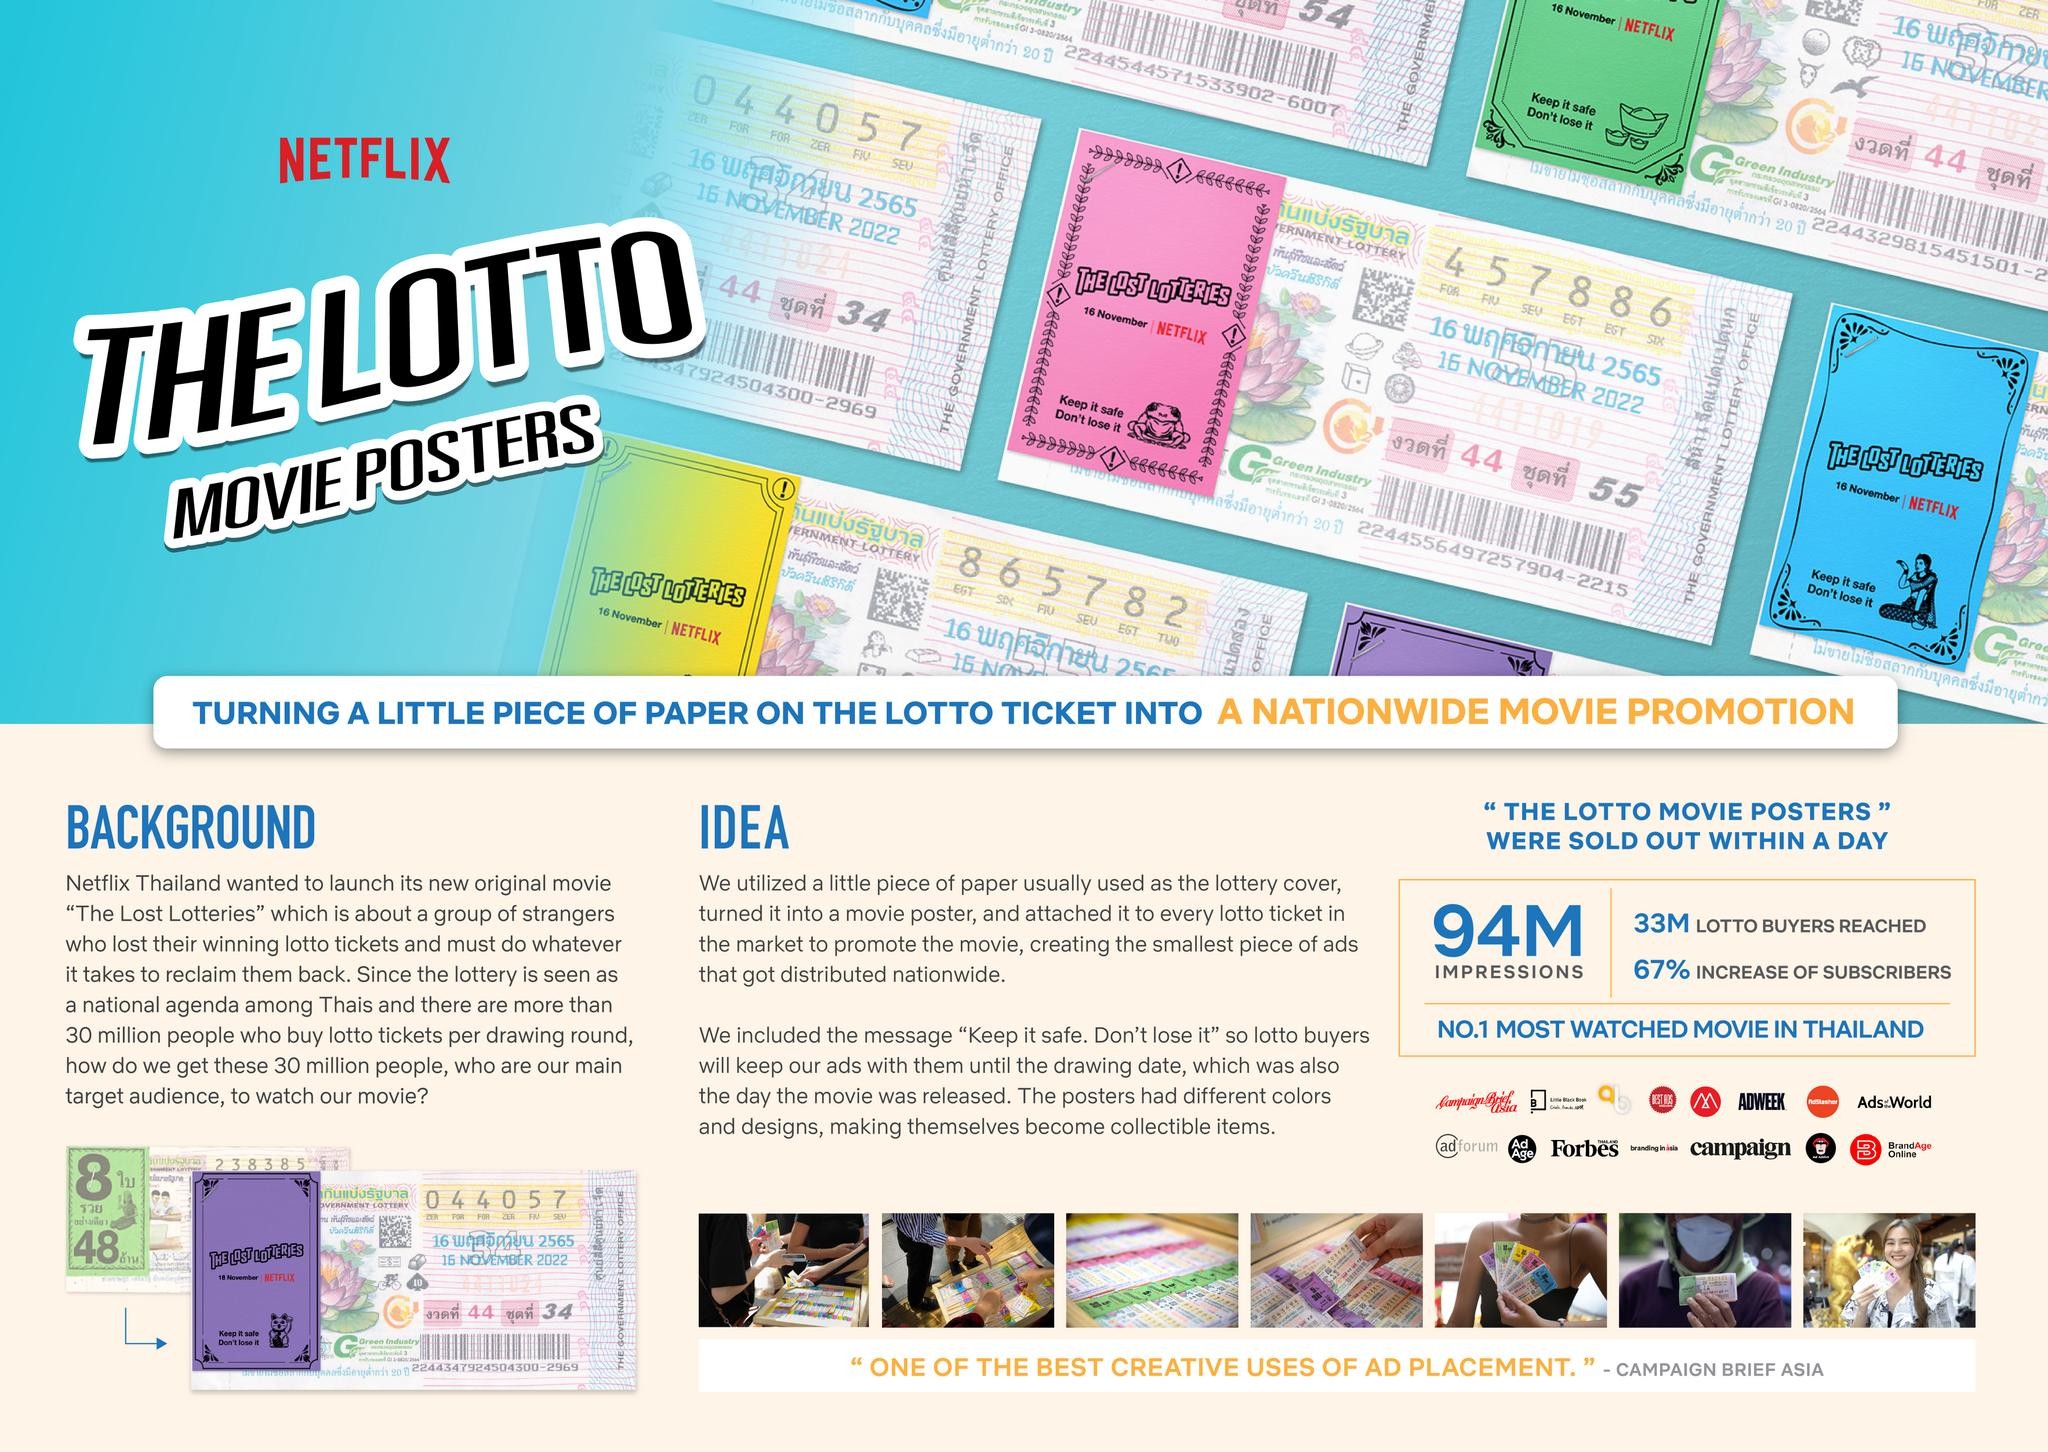 THE LOTTO MOVIE POSTERS